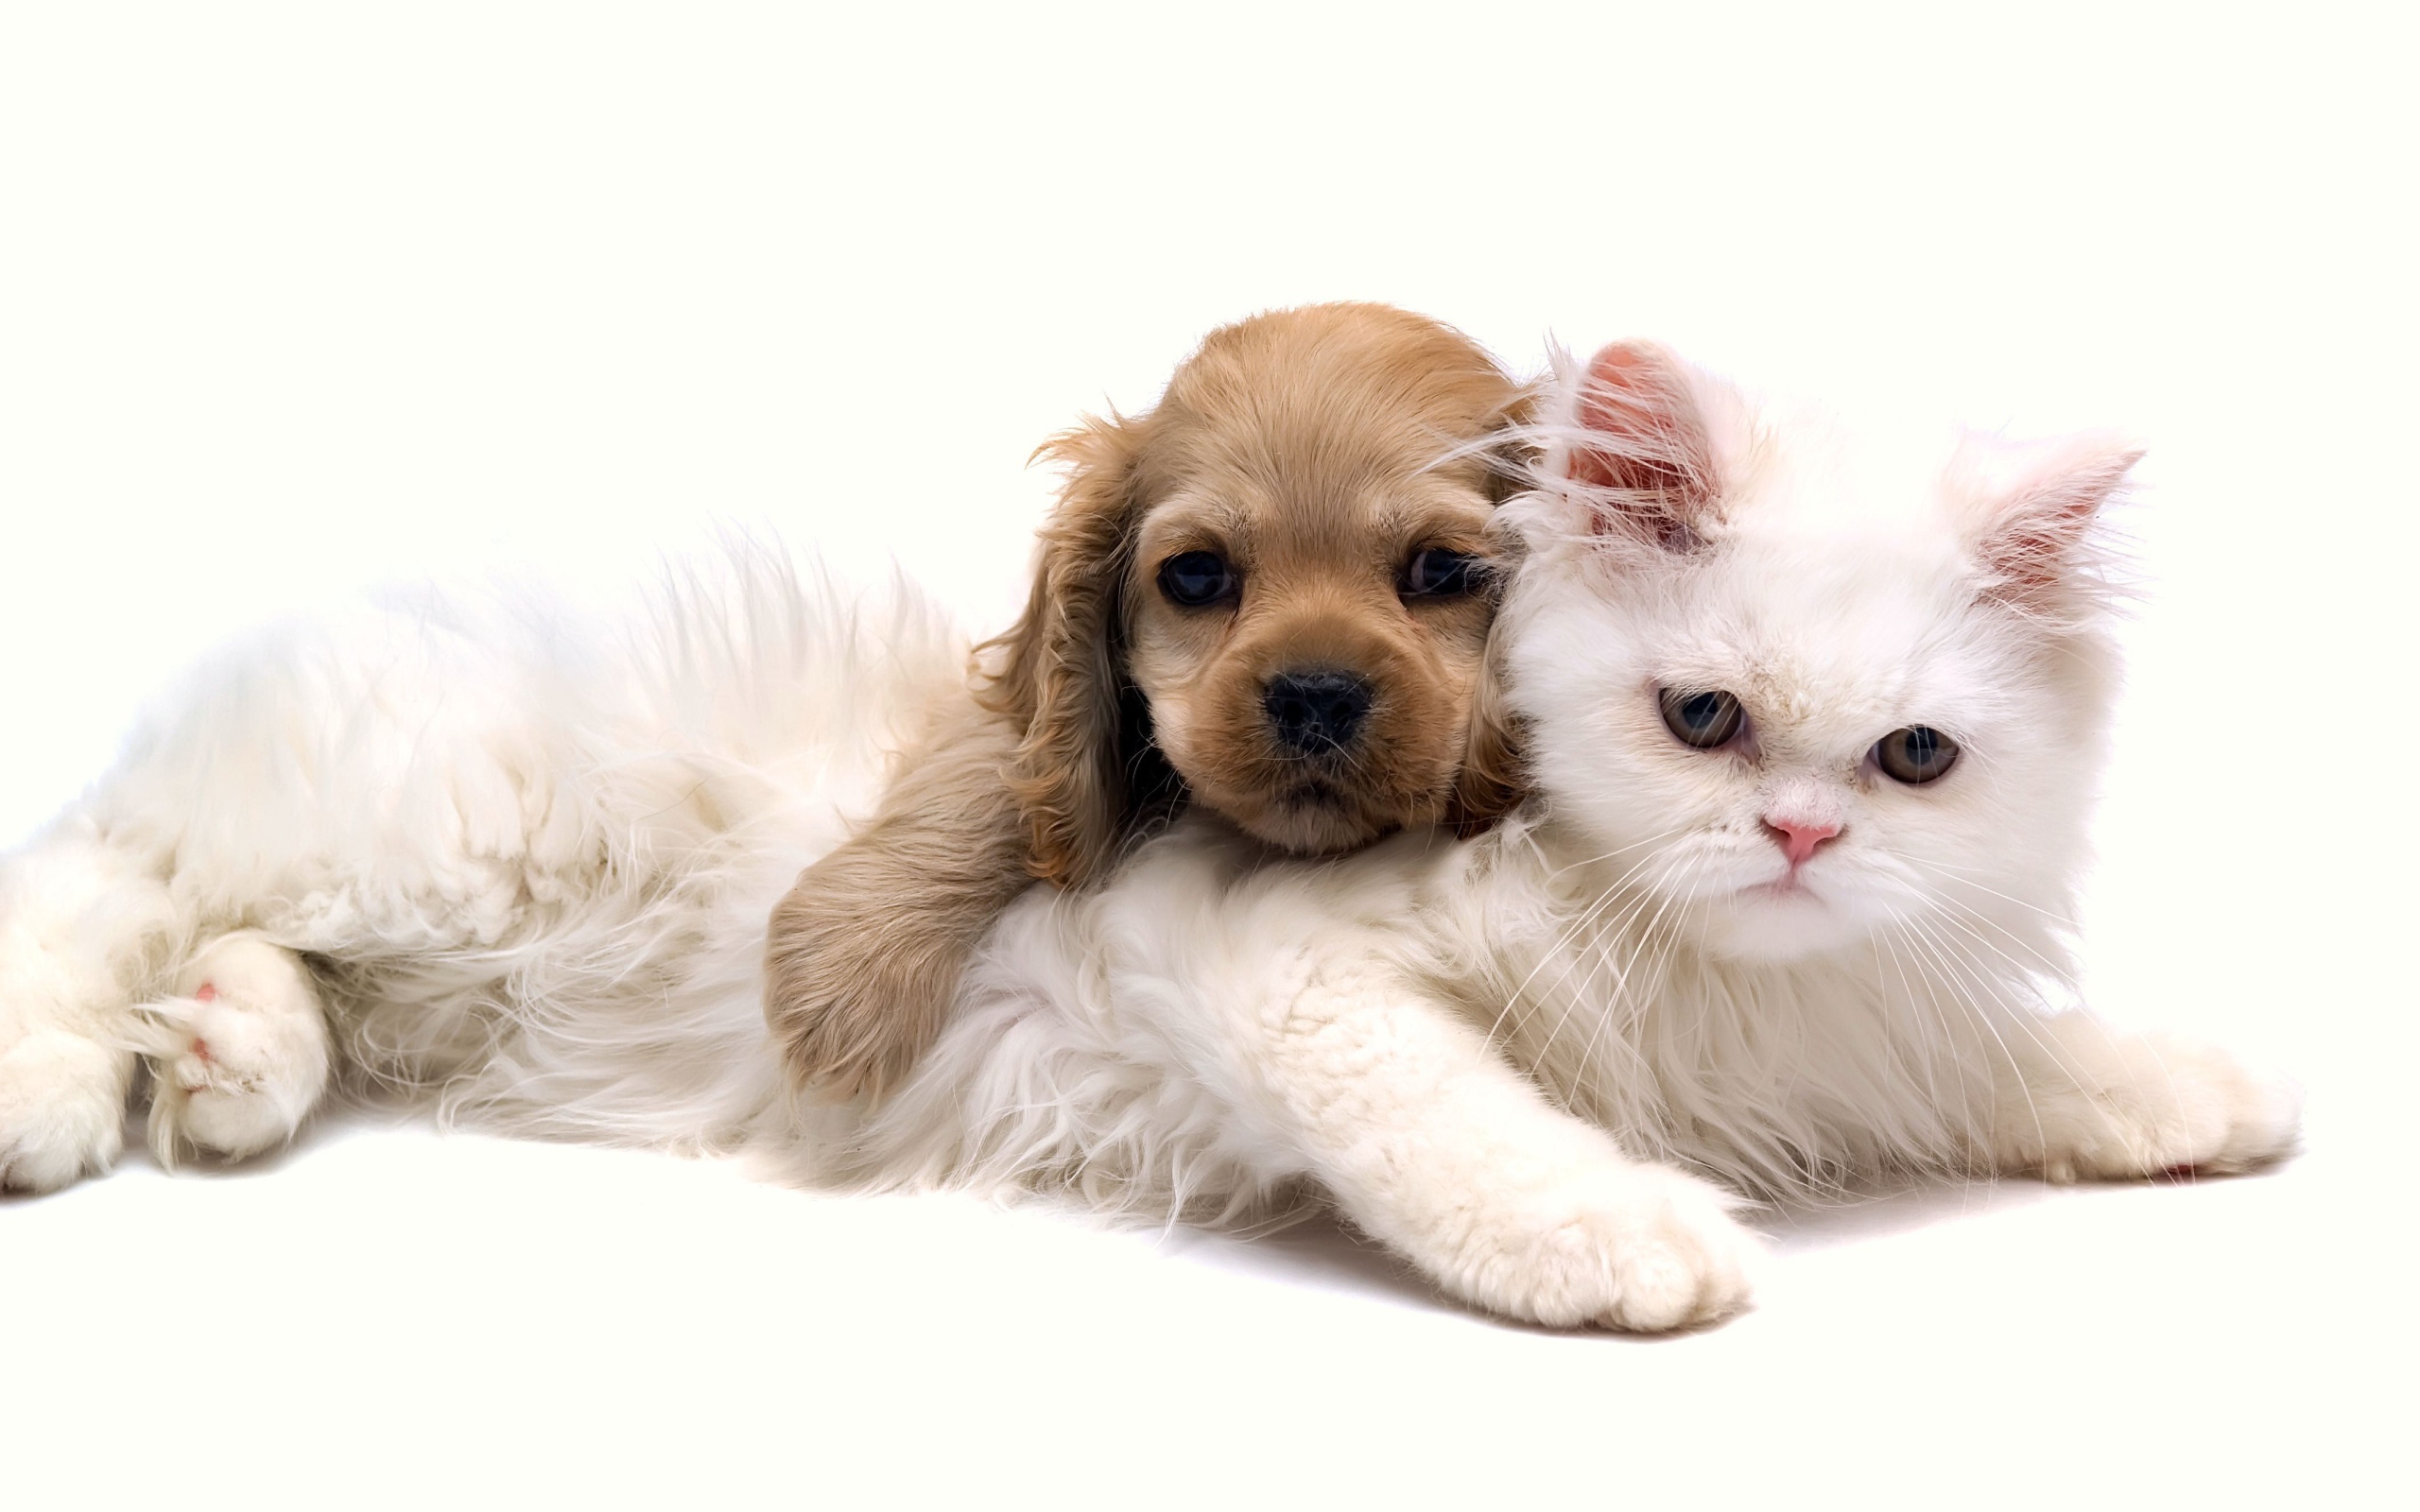 White cat with a puppy on a white background